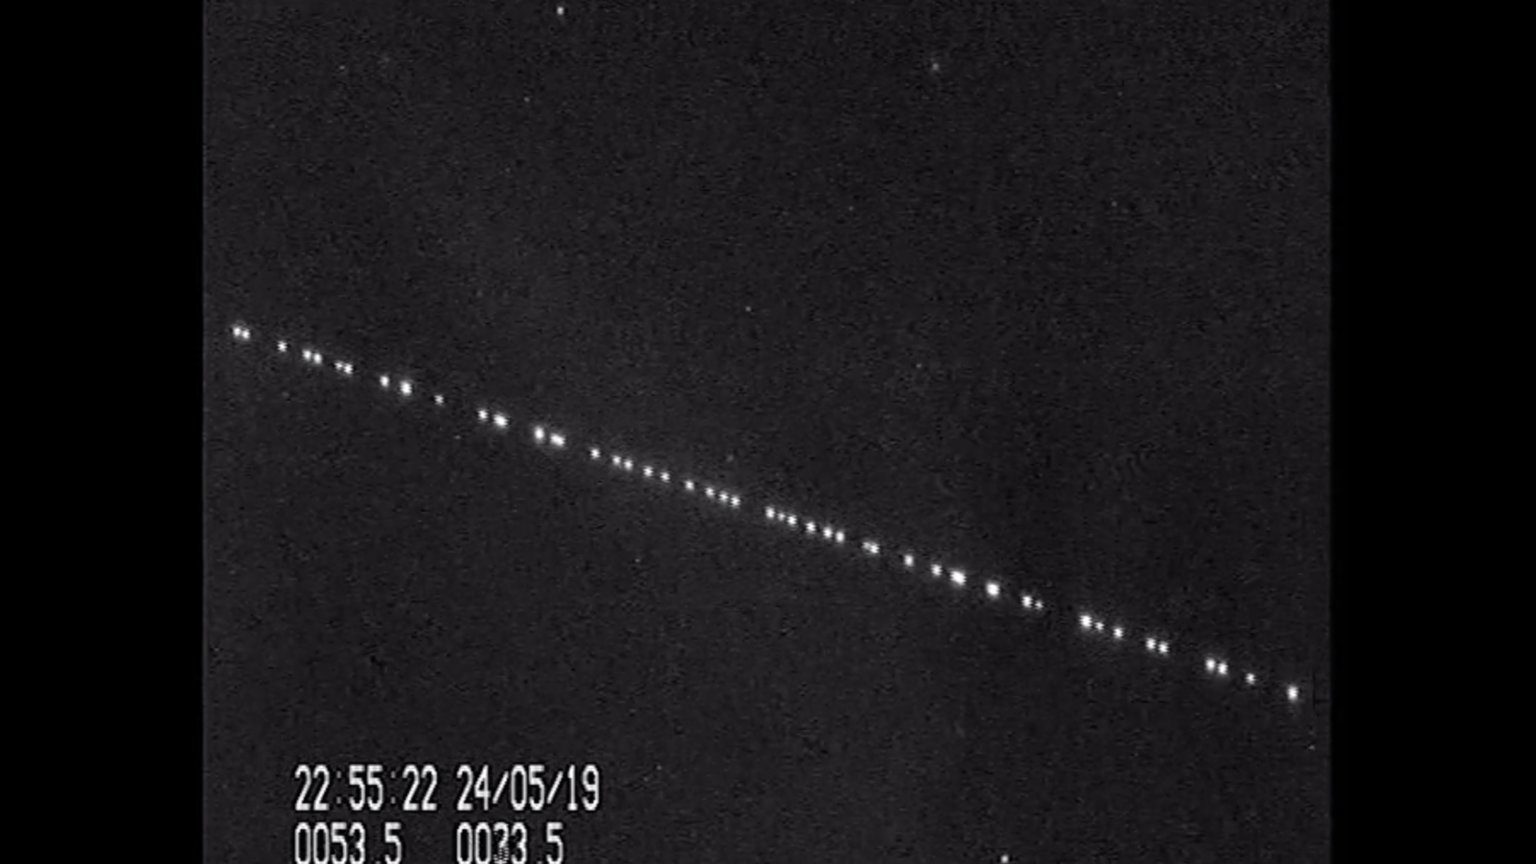 An astronomer in the Netherlands captured the Starlink train